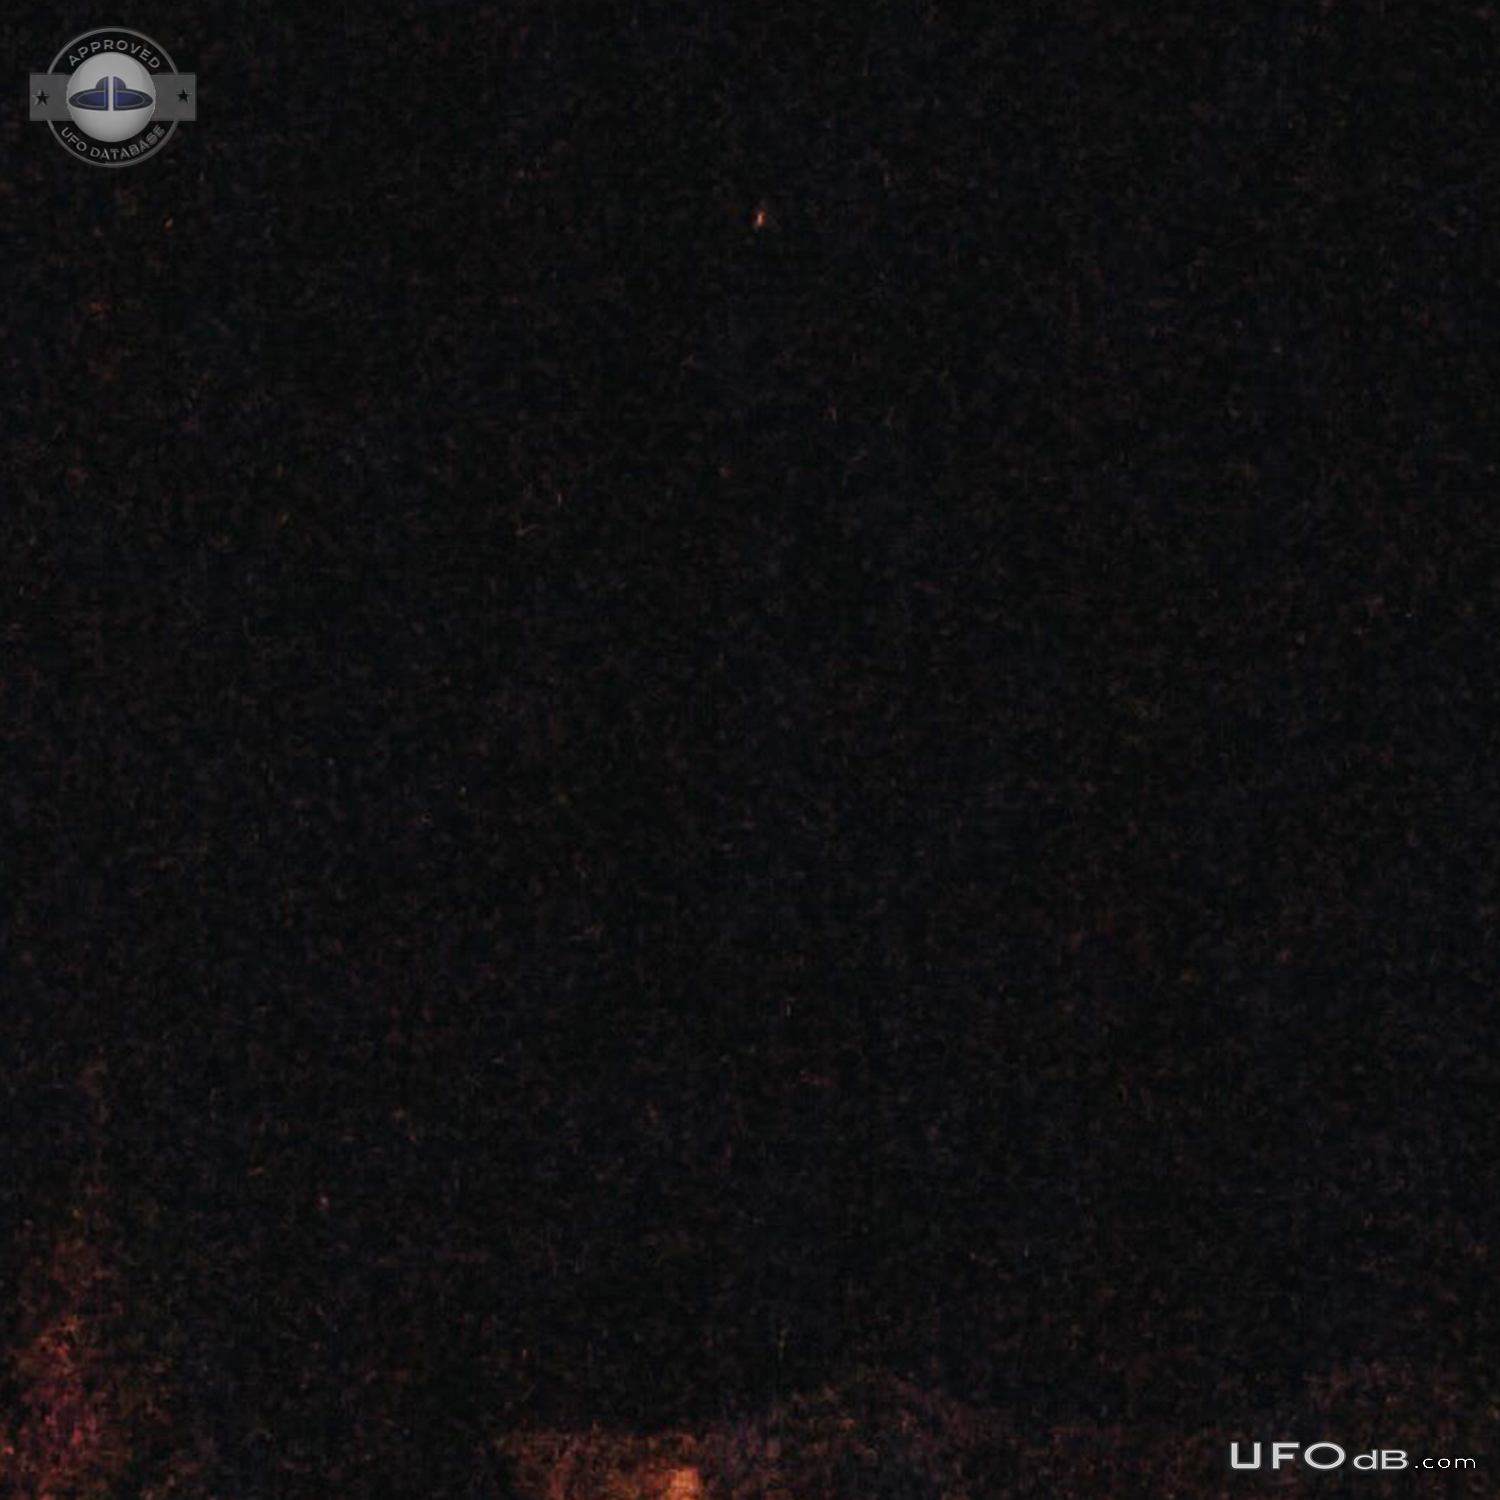 Saw a bright glowing orange UFO hover and move oddly in the night sky  UFO Picture #756-2